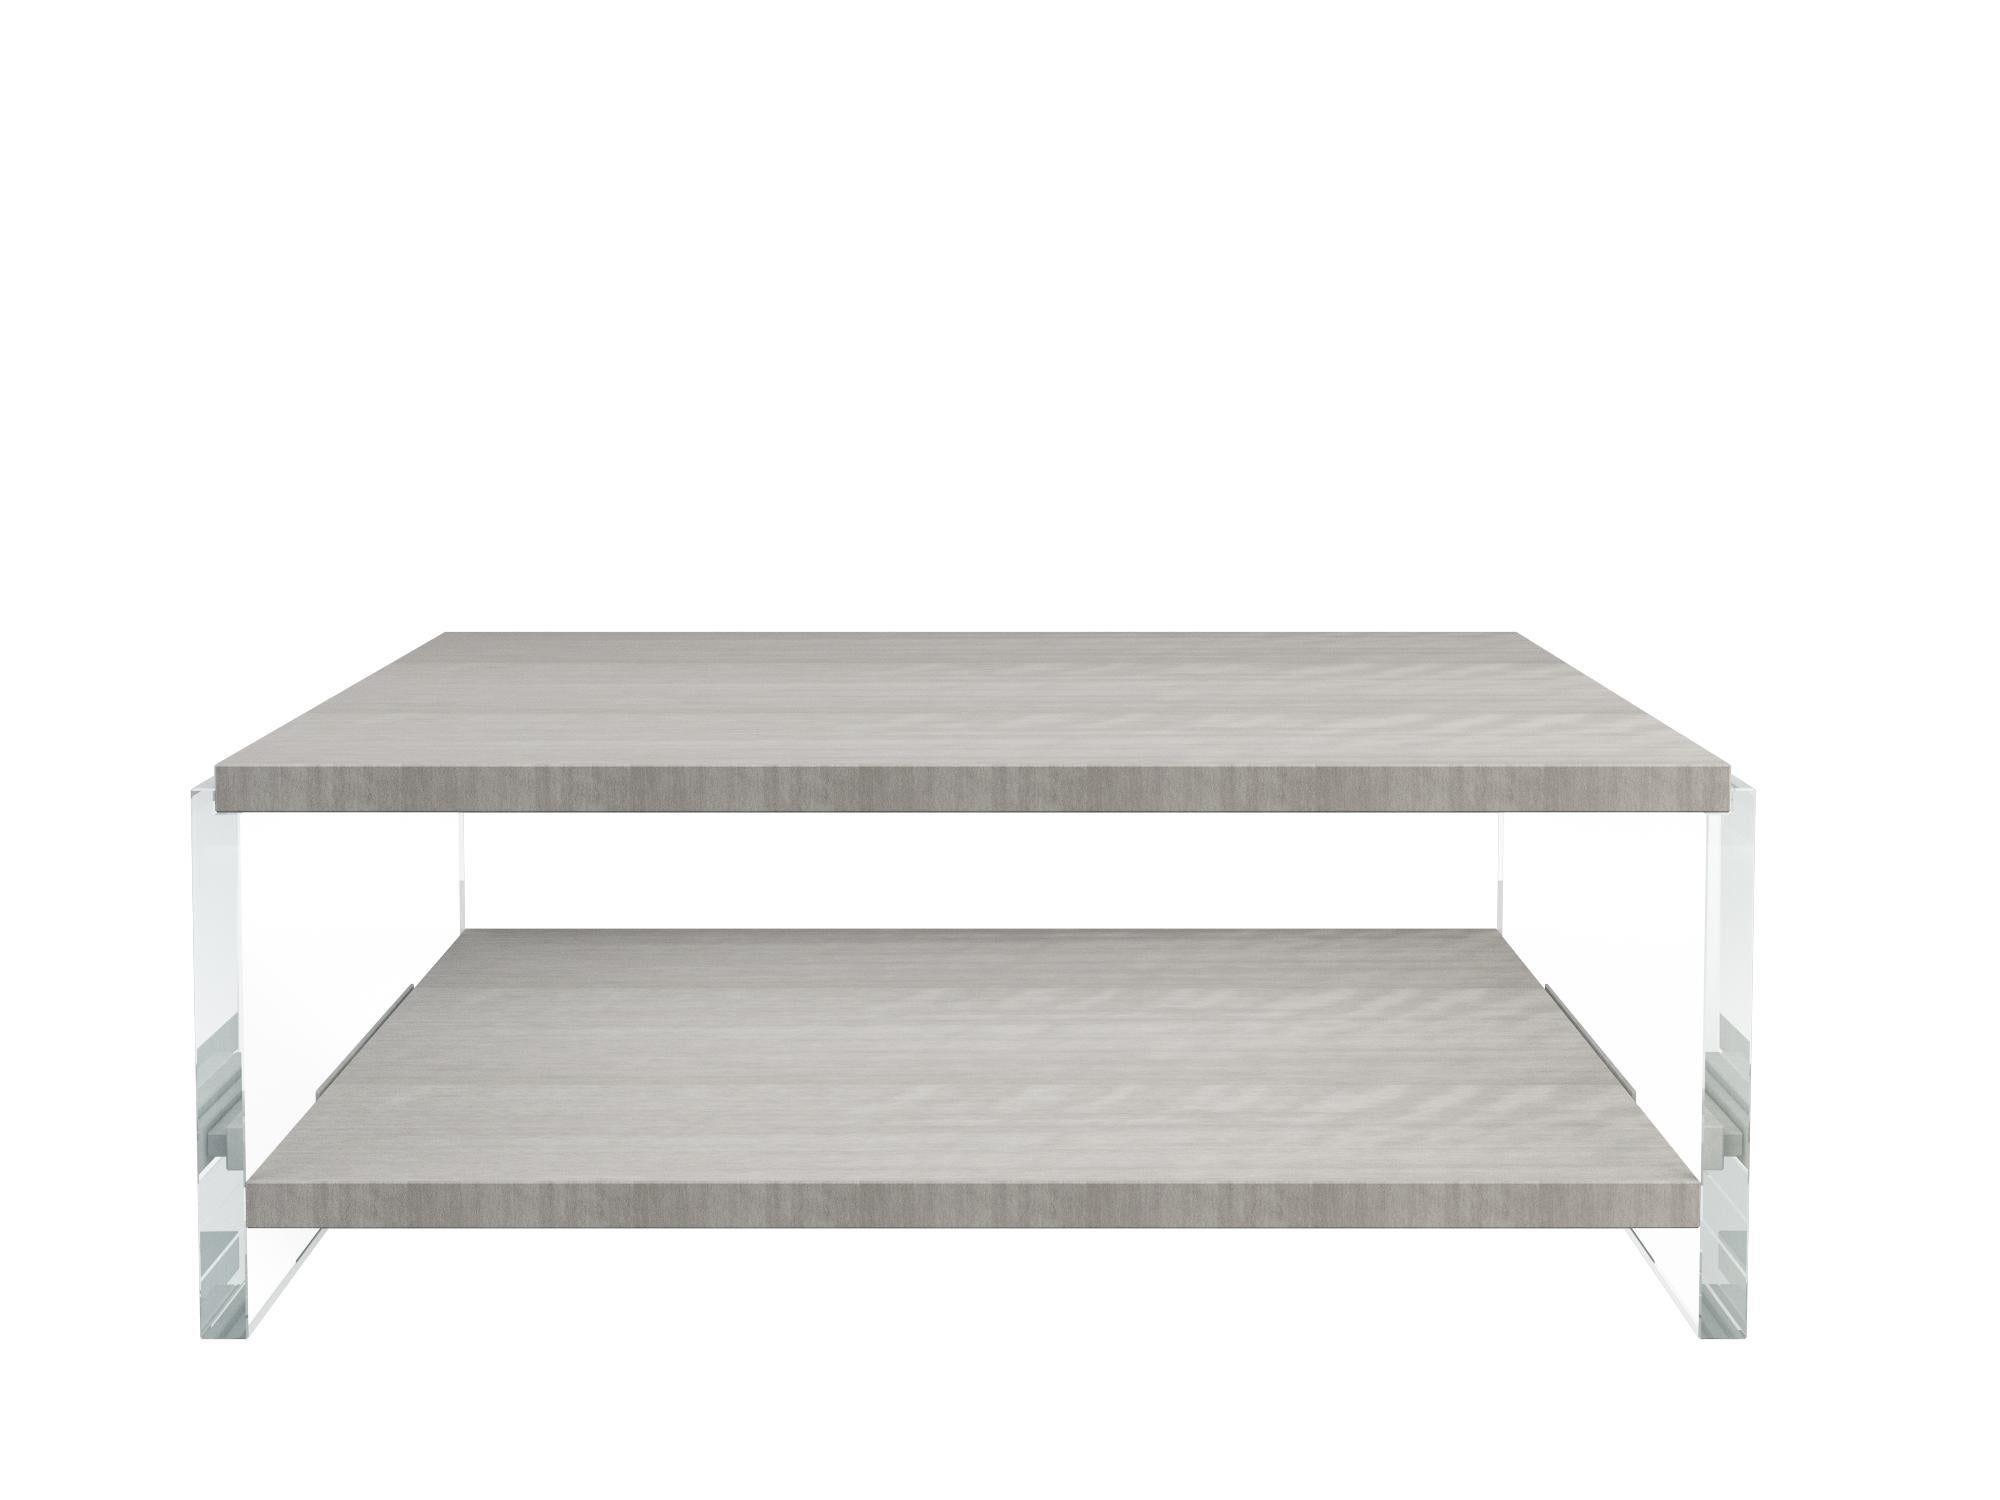 Vega cocktail table by Jonathan Franc - the figured grey dyed sycamore rectangular top is supported by two crystal clear acrylic monolith legs. Below is a gray dyed sycamore shelf. The finish on the table has been hand polished to a high gloss.